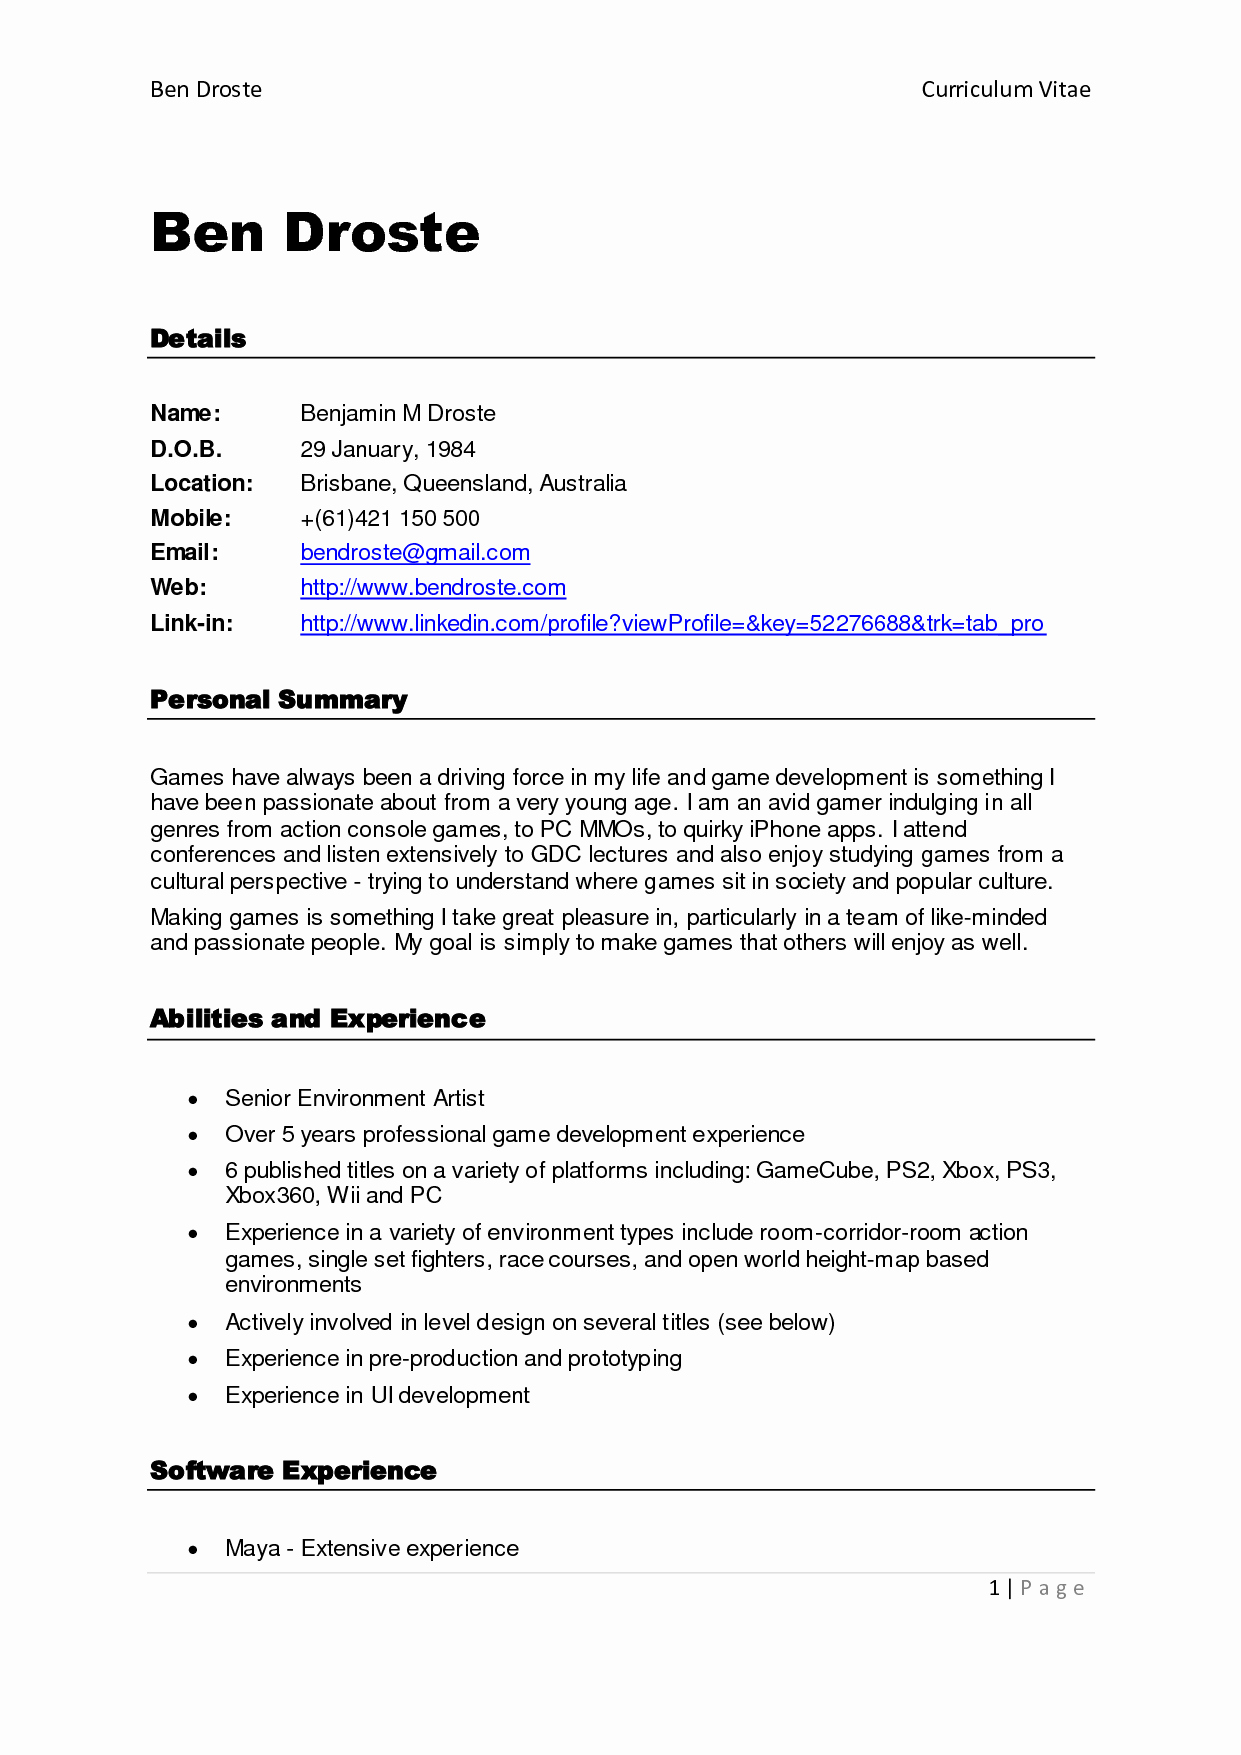 Free Resume Builder and Print